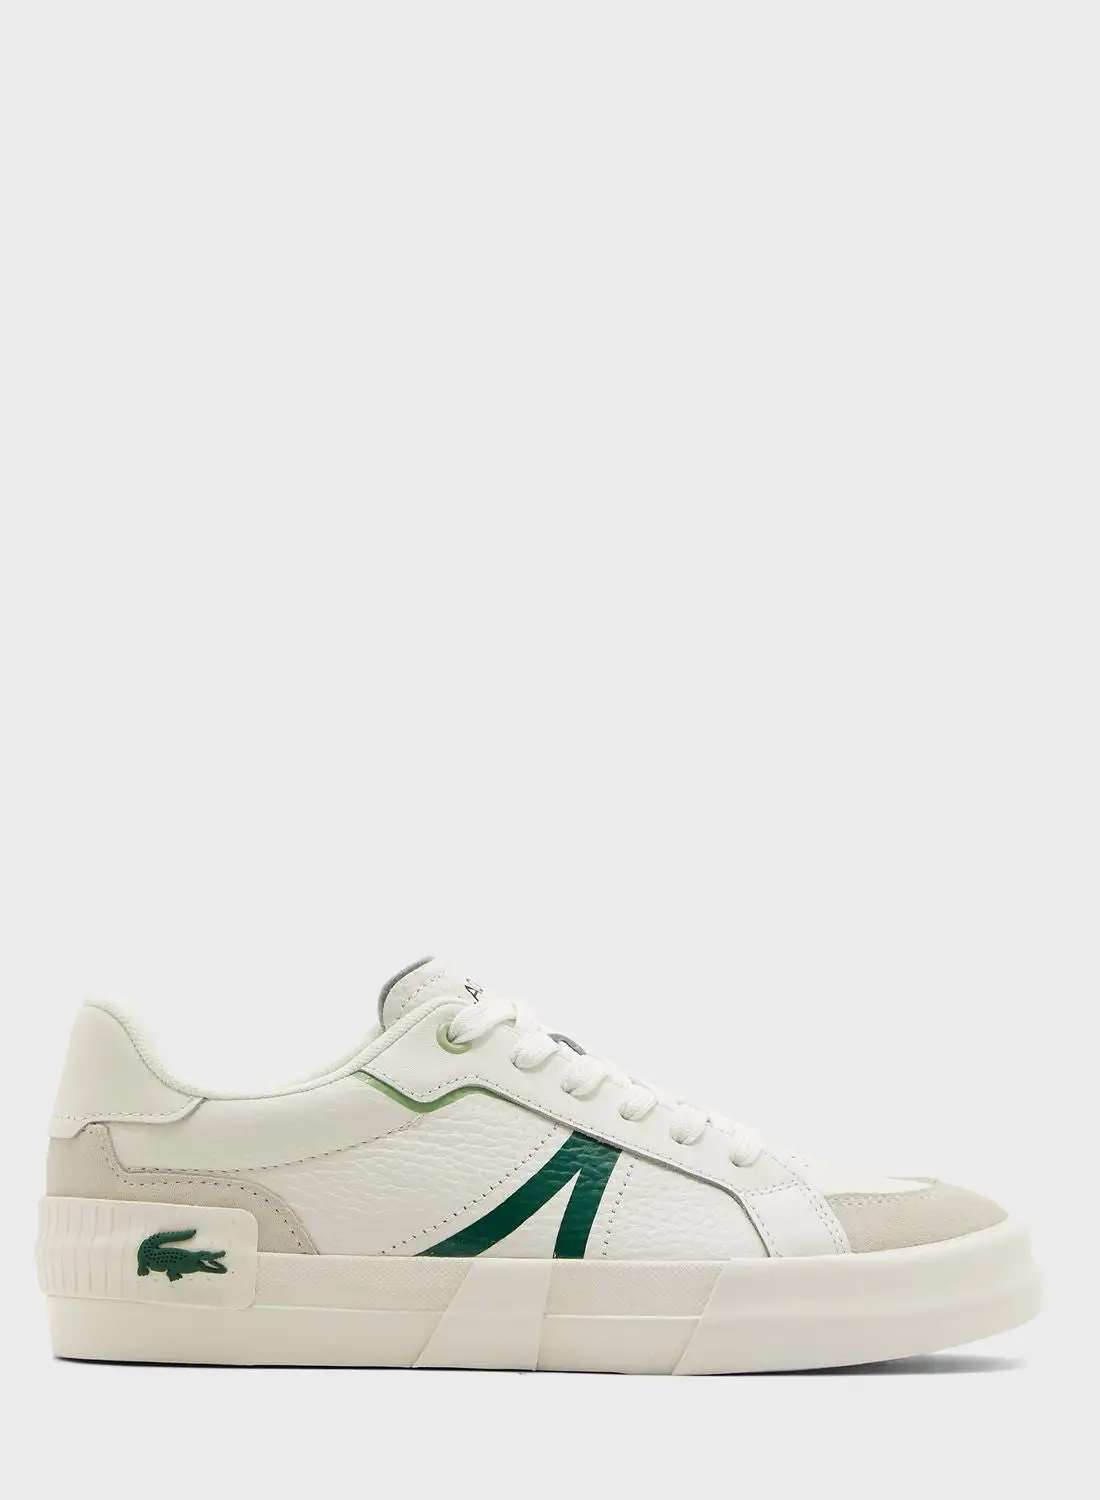 LACOSTE Casual Low Top Sneakers